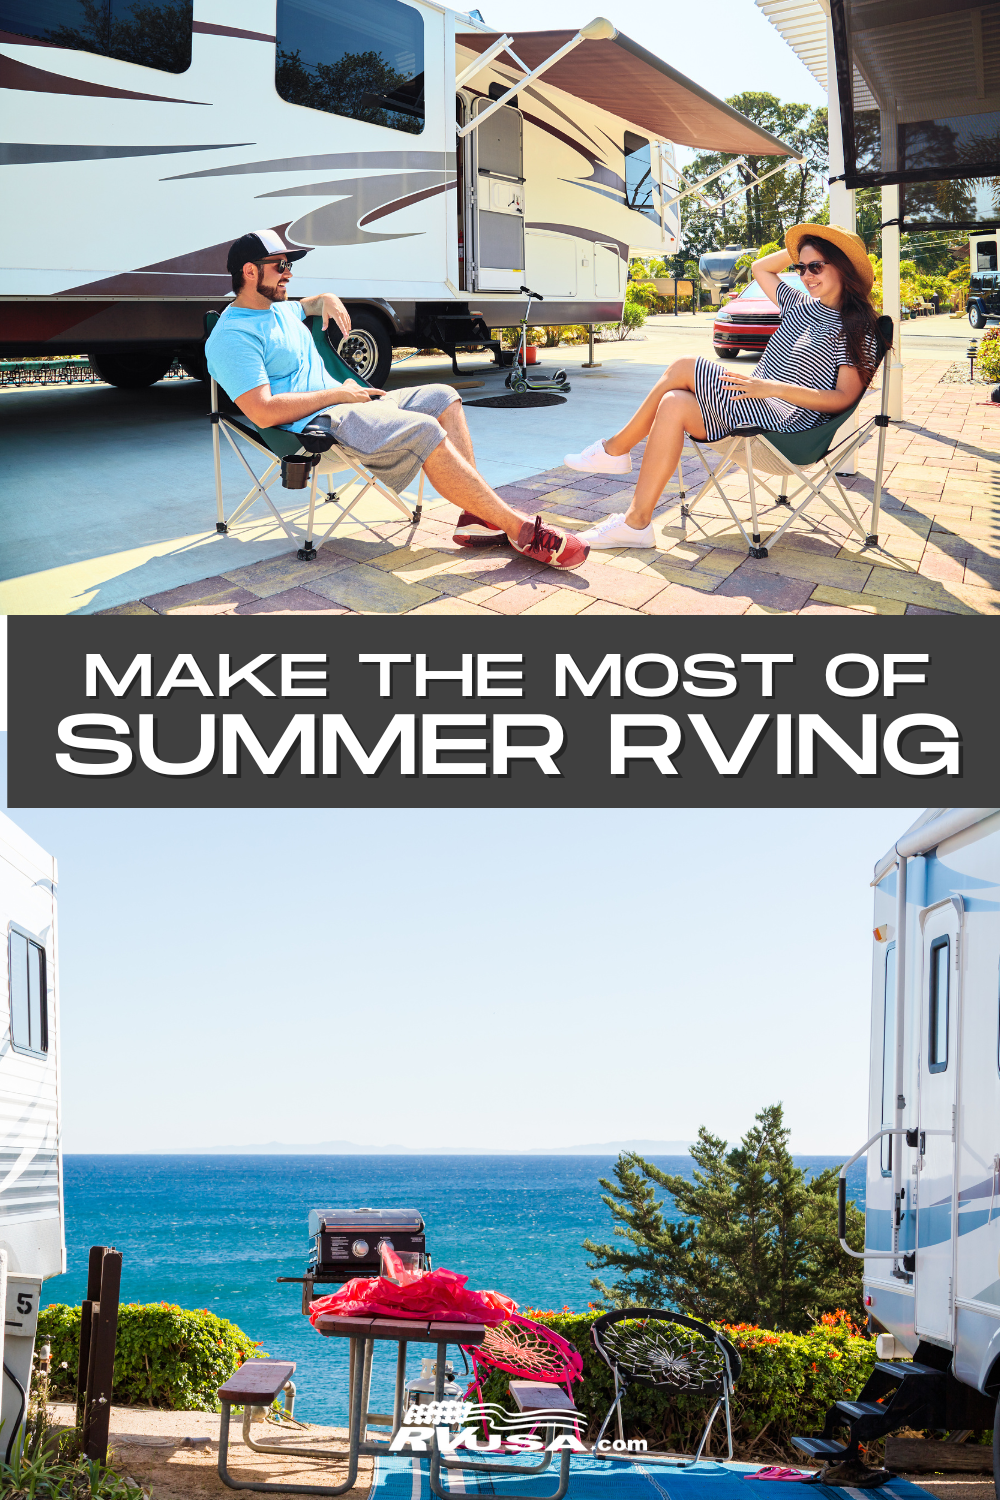 Photos of two different setups for summer RV travels. Text reads "Make the most of summer RVing"